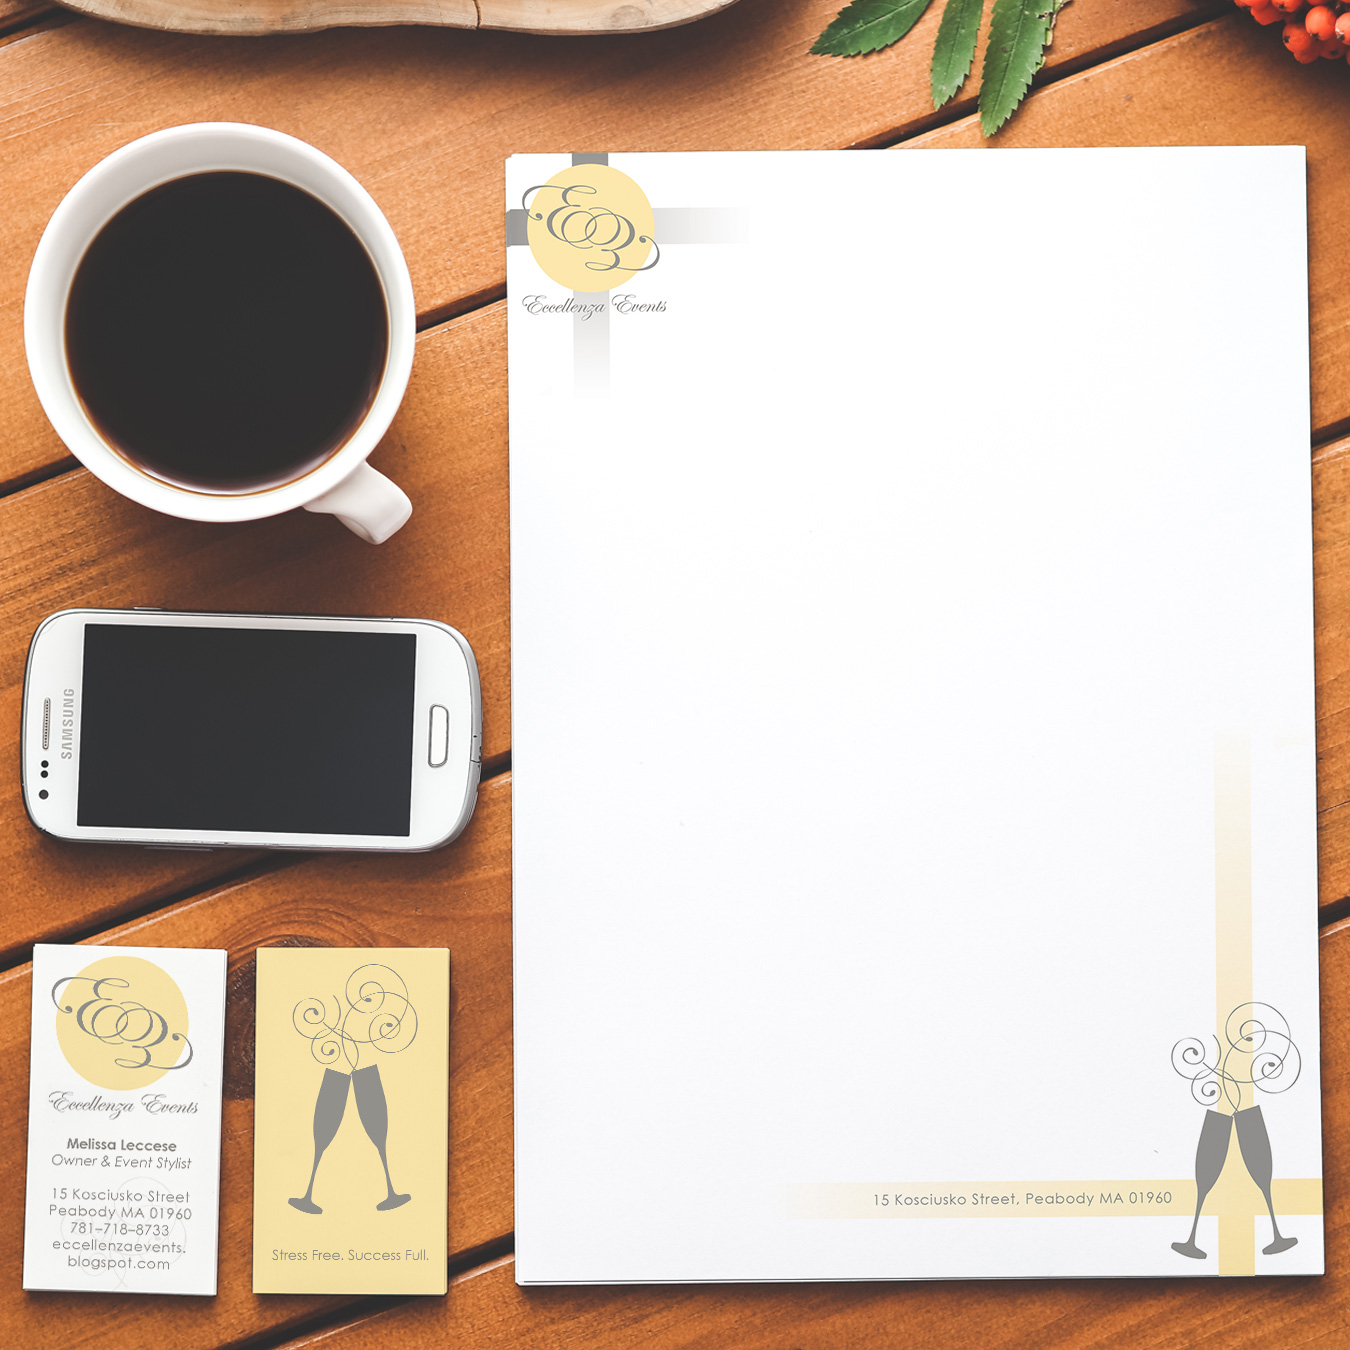 Eccelenza Events - letterhead and business card